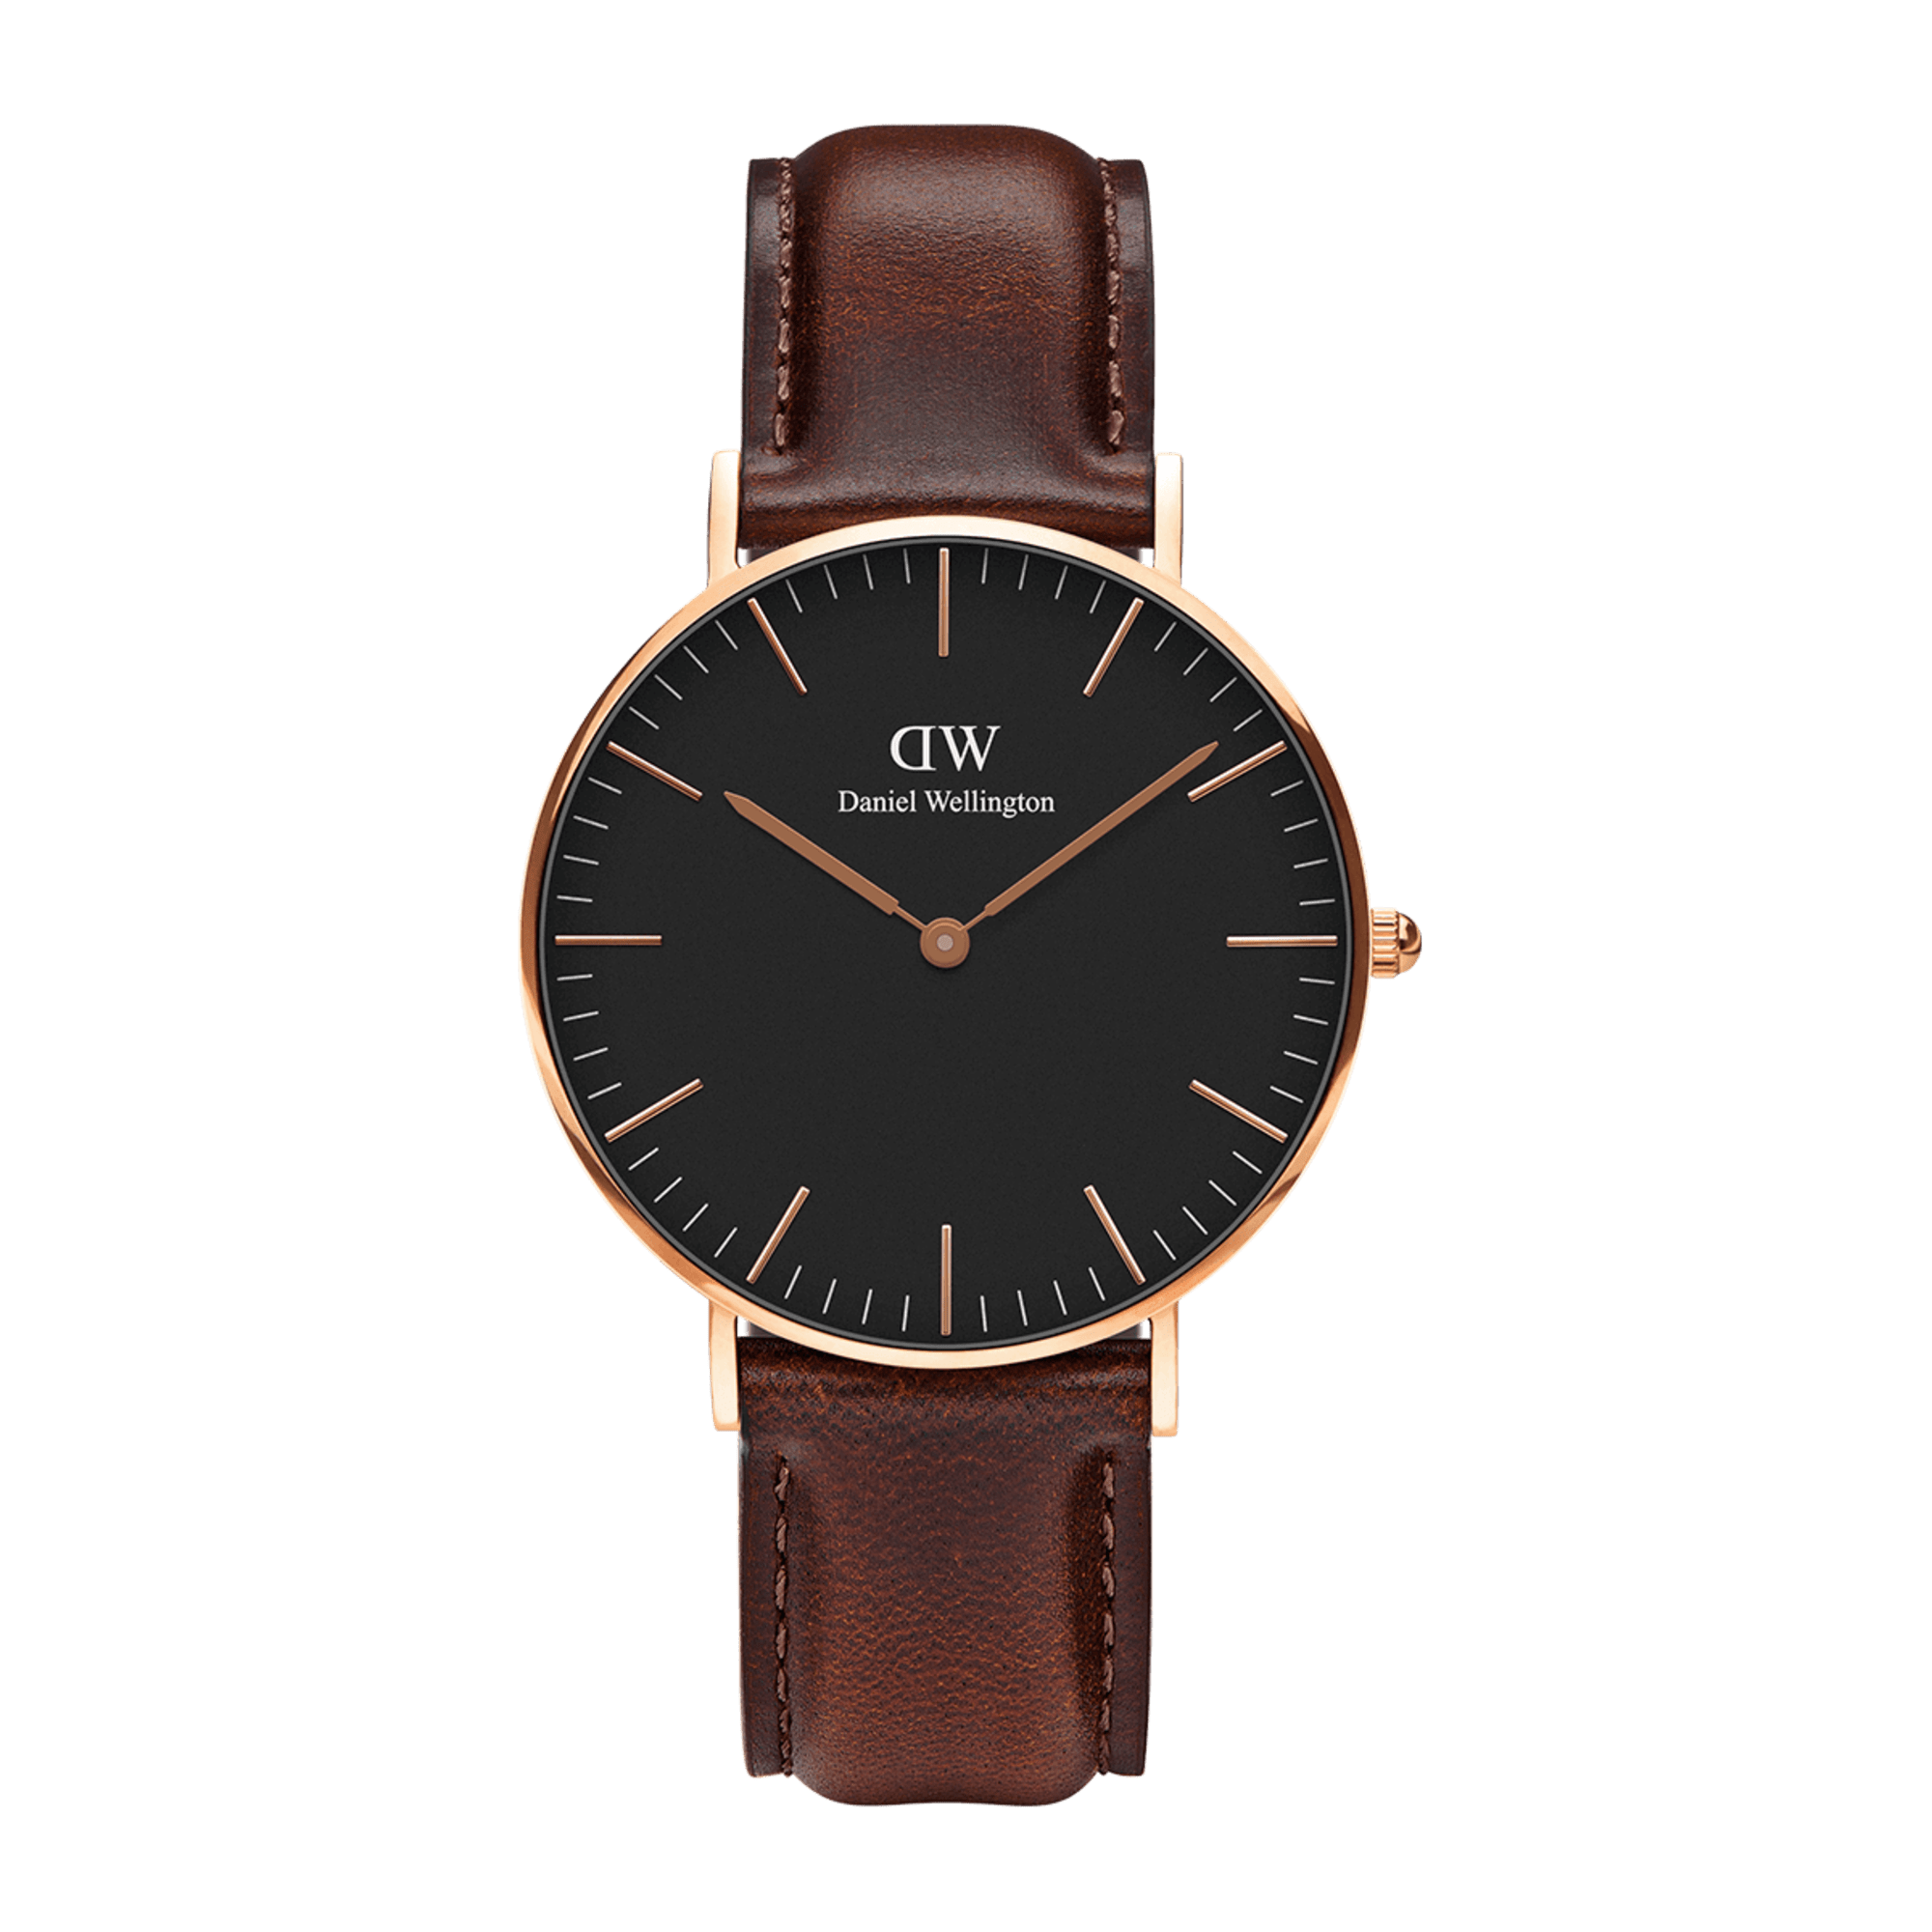 Bristol - Black dial men's watch with leather strap | DW